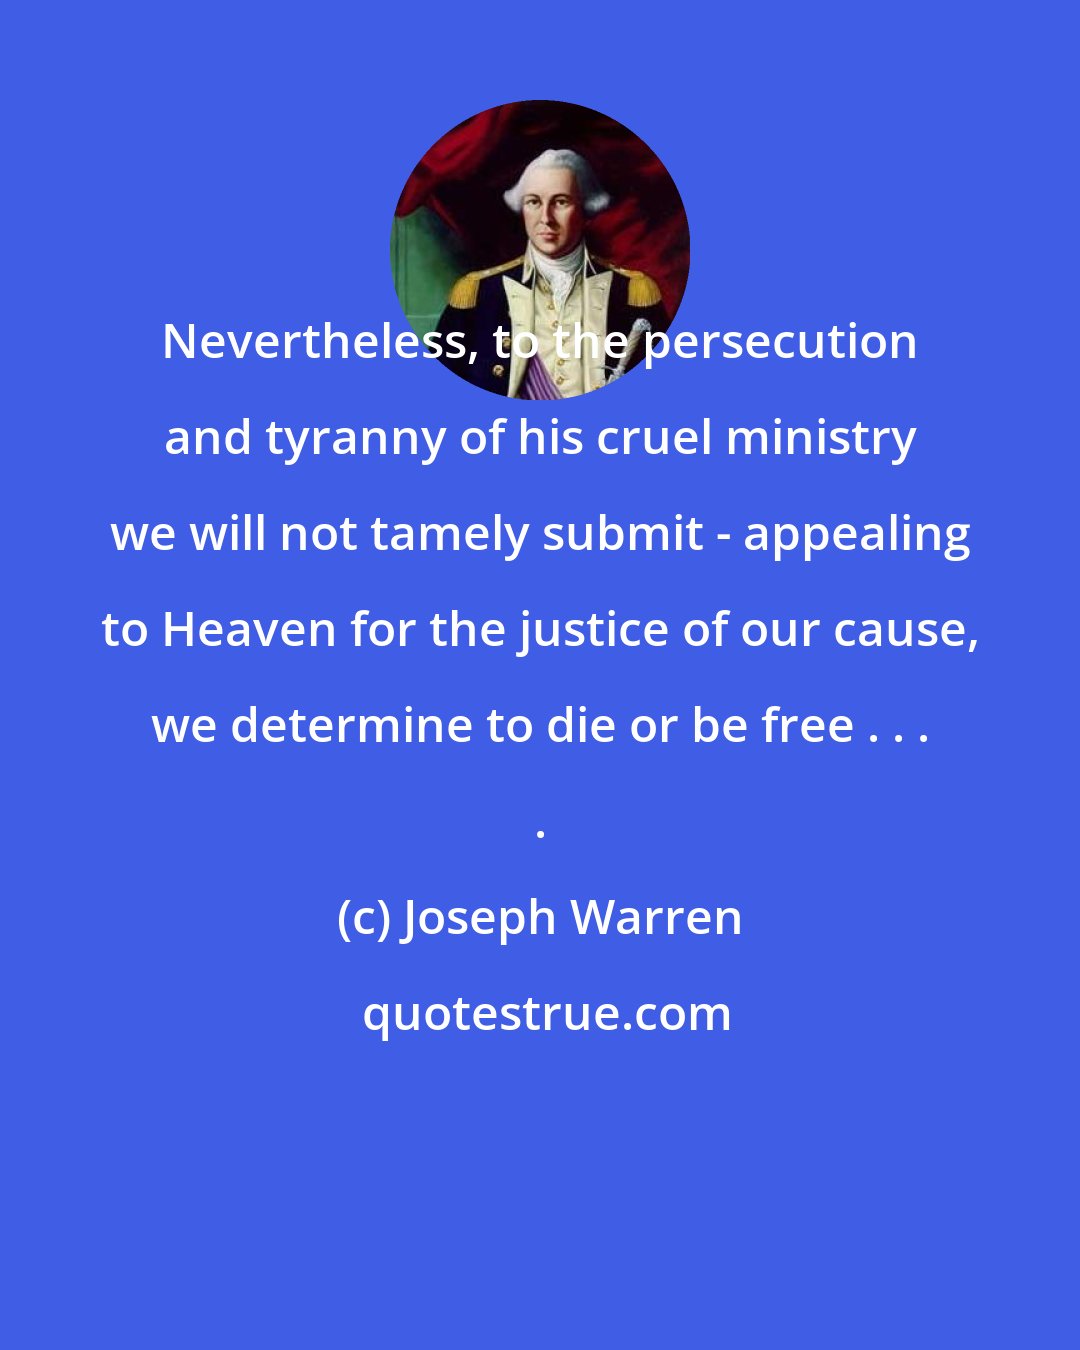 Joseph Warren: Nevertheless, to the persecution and tyranny of his cruel ministry we will not tamely submit - appealing to Heaven for the justice of our cause, we determine to die or be free . . . .